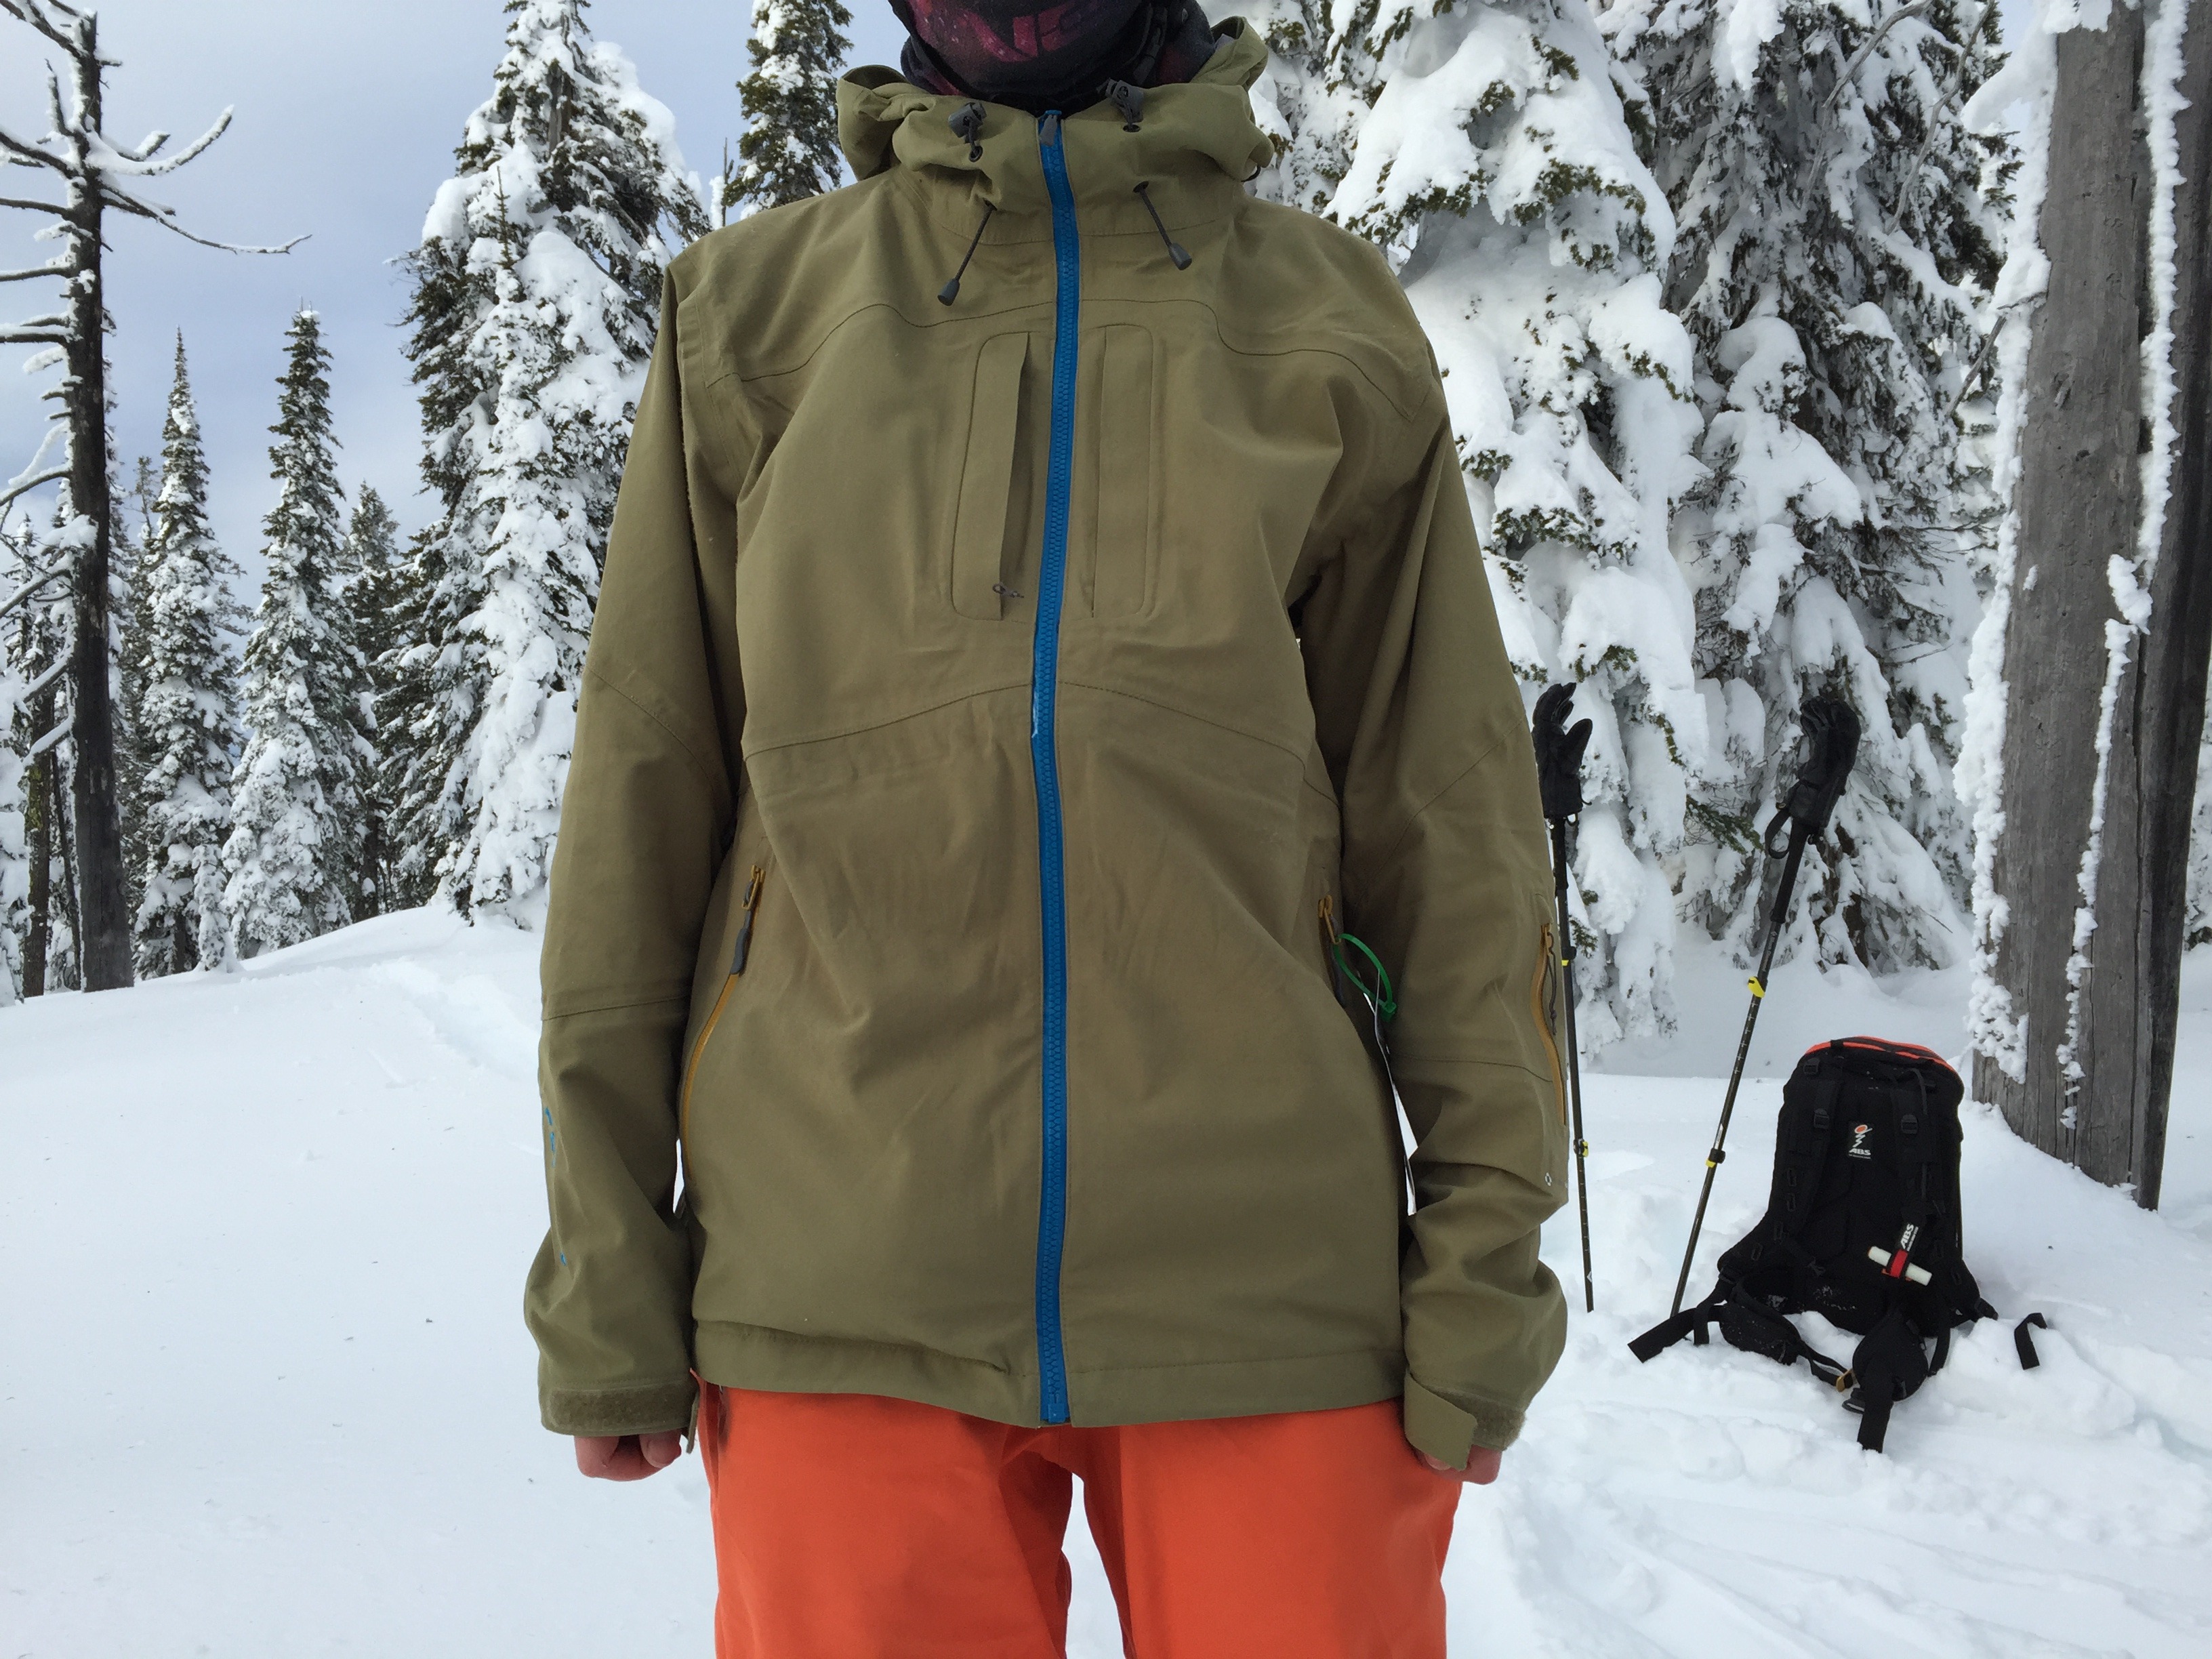 Relaxed fit of Quantum Pro Jacket.